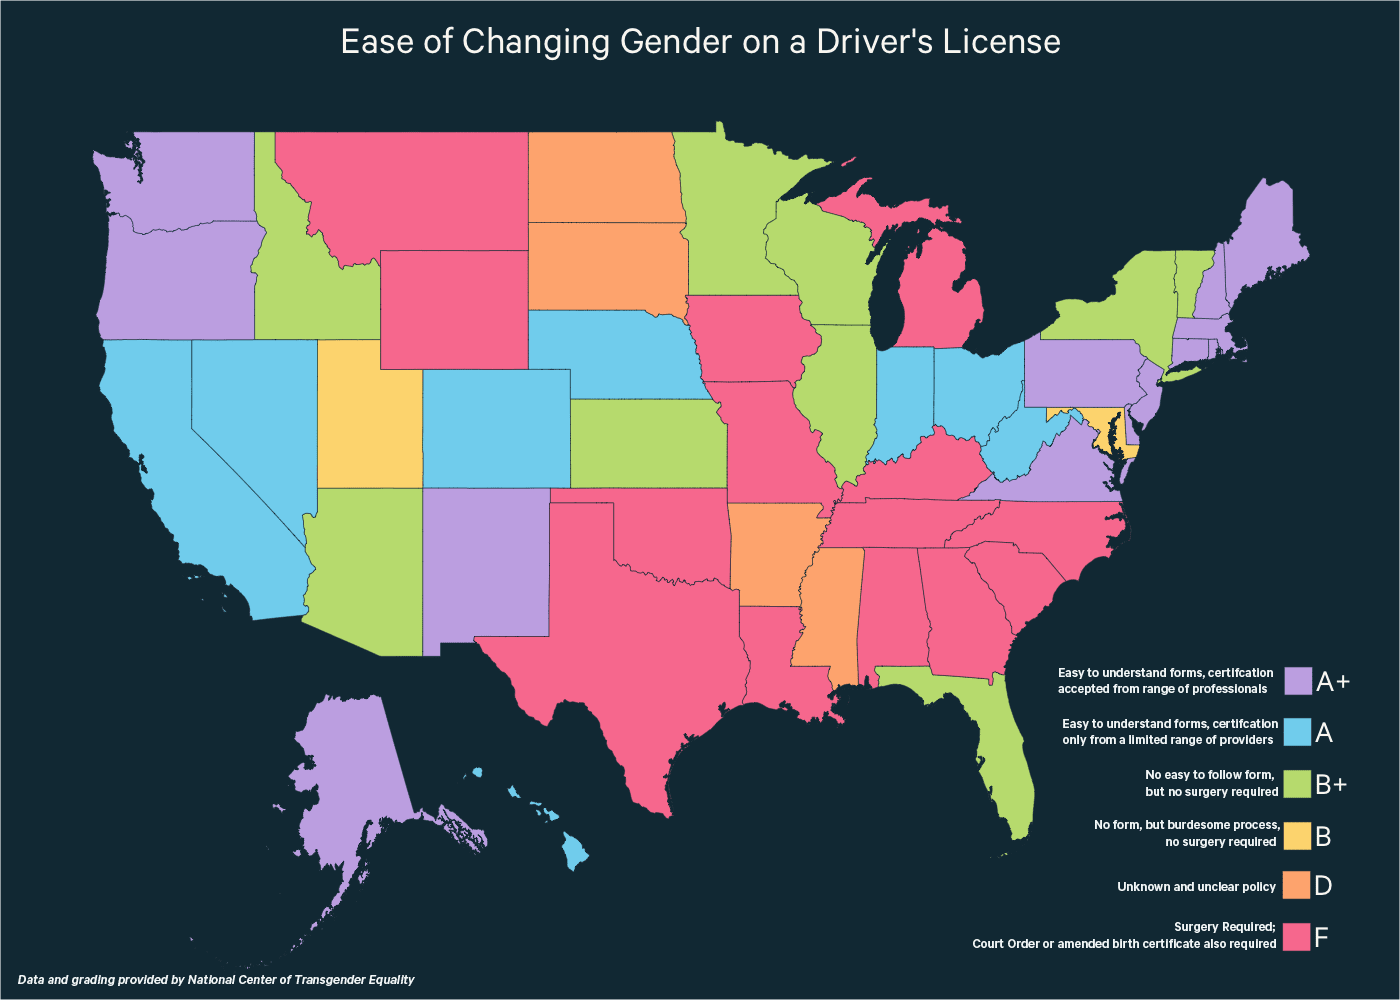 transgender gender states surgery license driver reassignment face confusion change map purchasing applicants insurance process changing state transition could proof